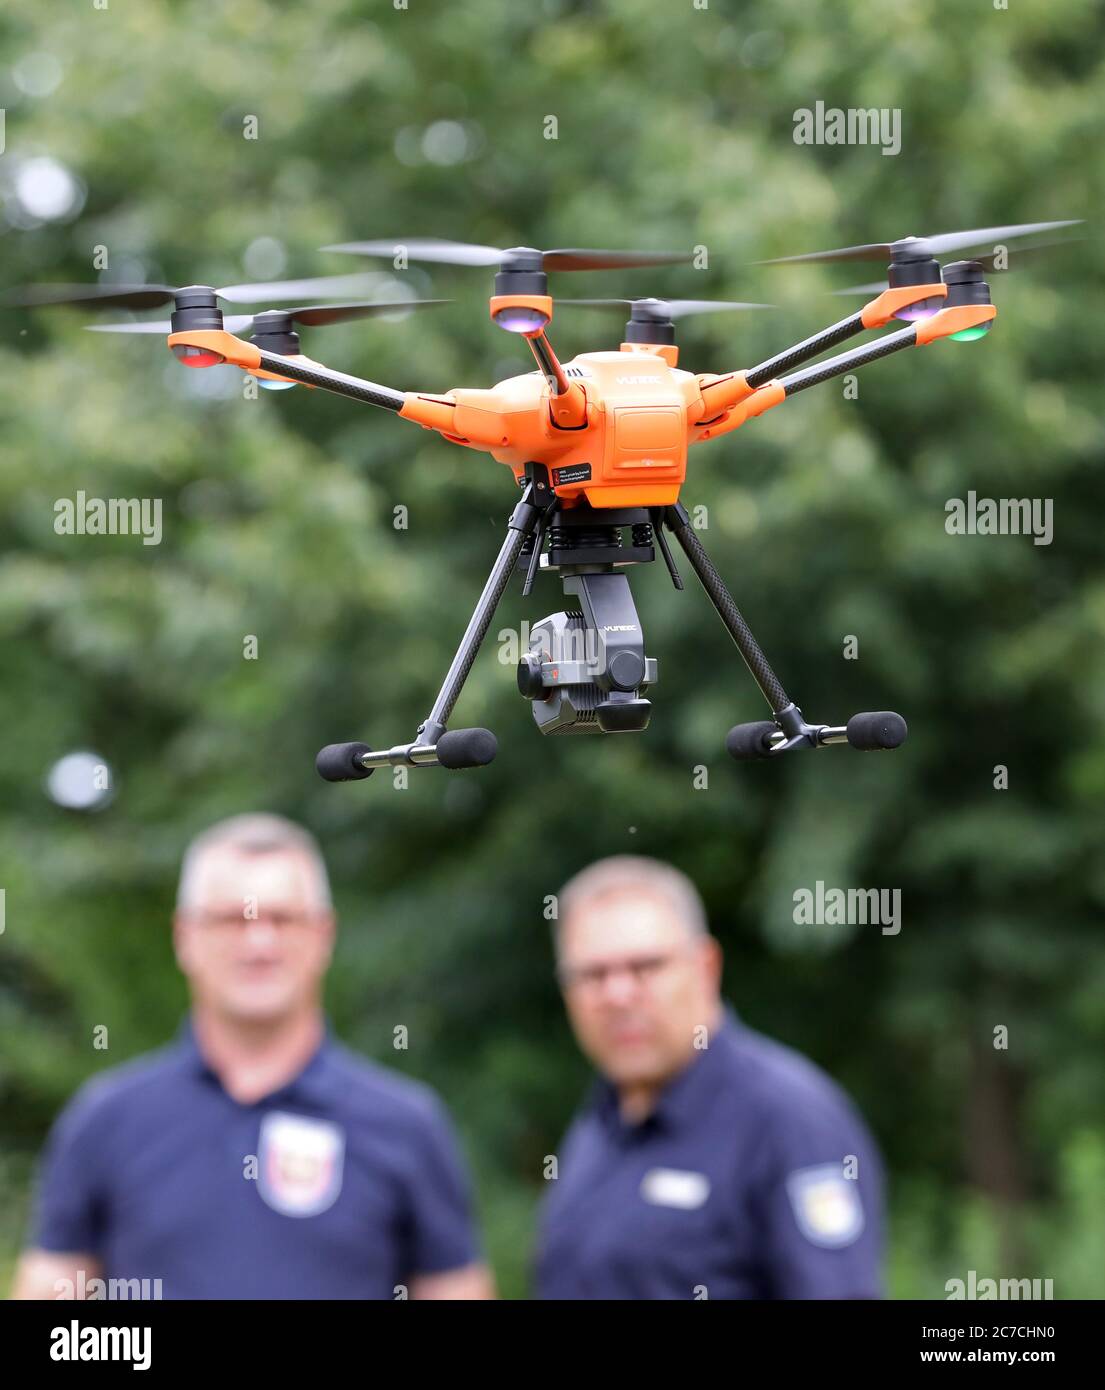 Malchow, Germany. 16th July, 2020. At the State School for Fire and Disaster Control, Volker Hecht (l-r), Stolpe Fire Department, and Jan Müller, instructor, are training with a Yuneec H520 drone. A total of eight Dohnen for fire and disaster control are now ready for deployment in all districts and district-free towns, and the training of 26 pilots for the ErkTr-L air reconnaissance team has been completed. Credit: Bernd Wüstneck/dpa-Zentralbild/ZB/dpa/Alamy Live News Stock Photo